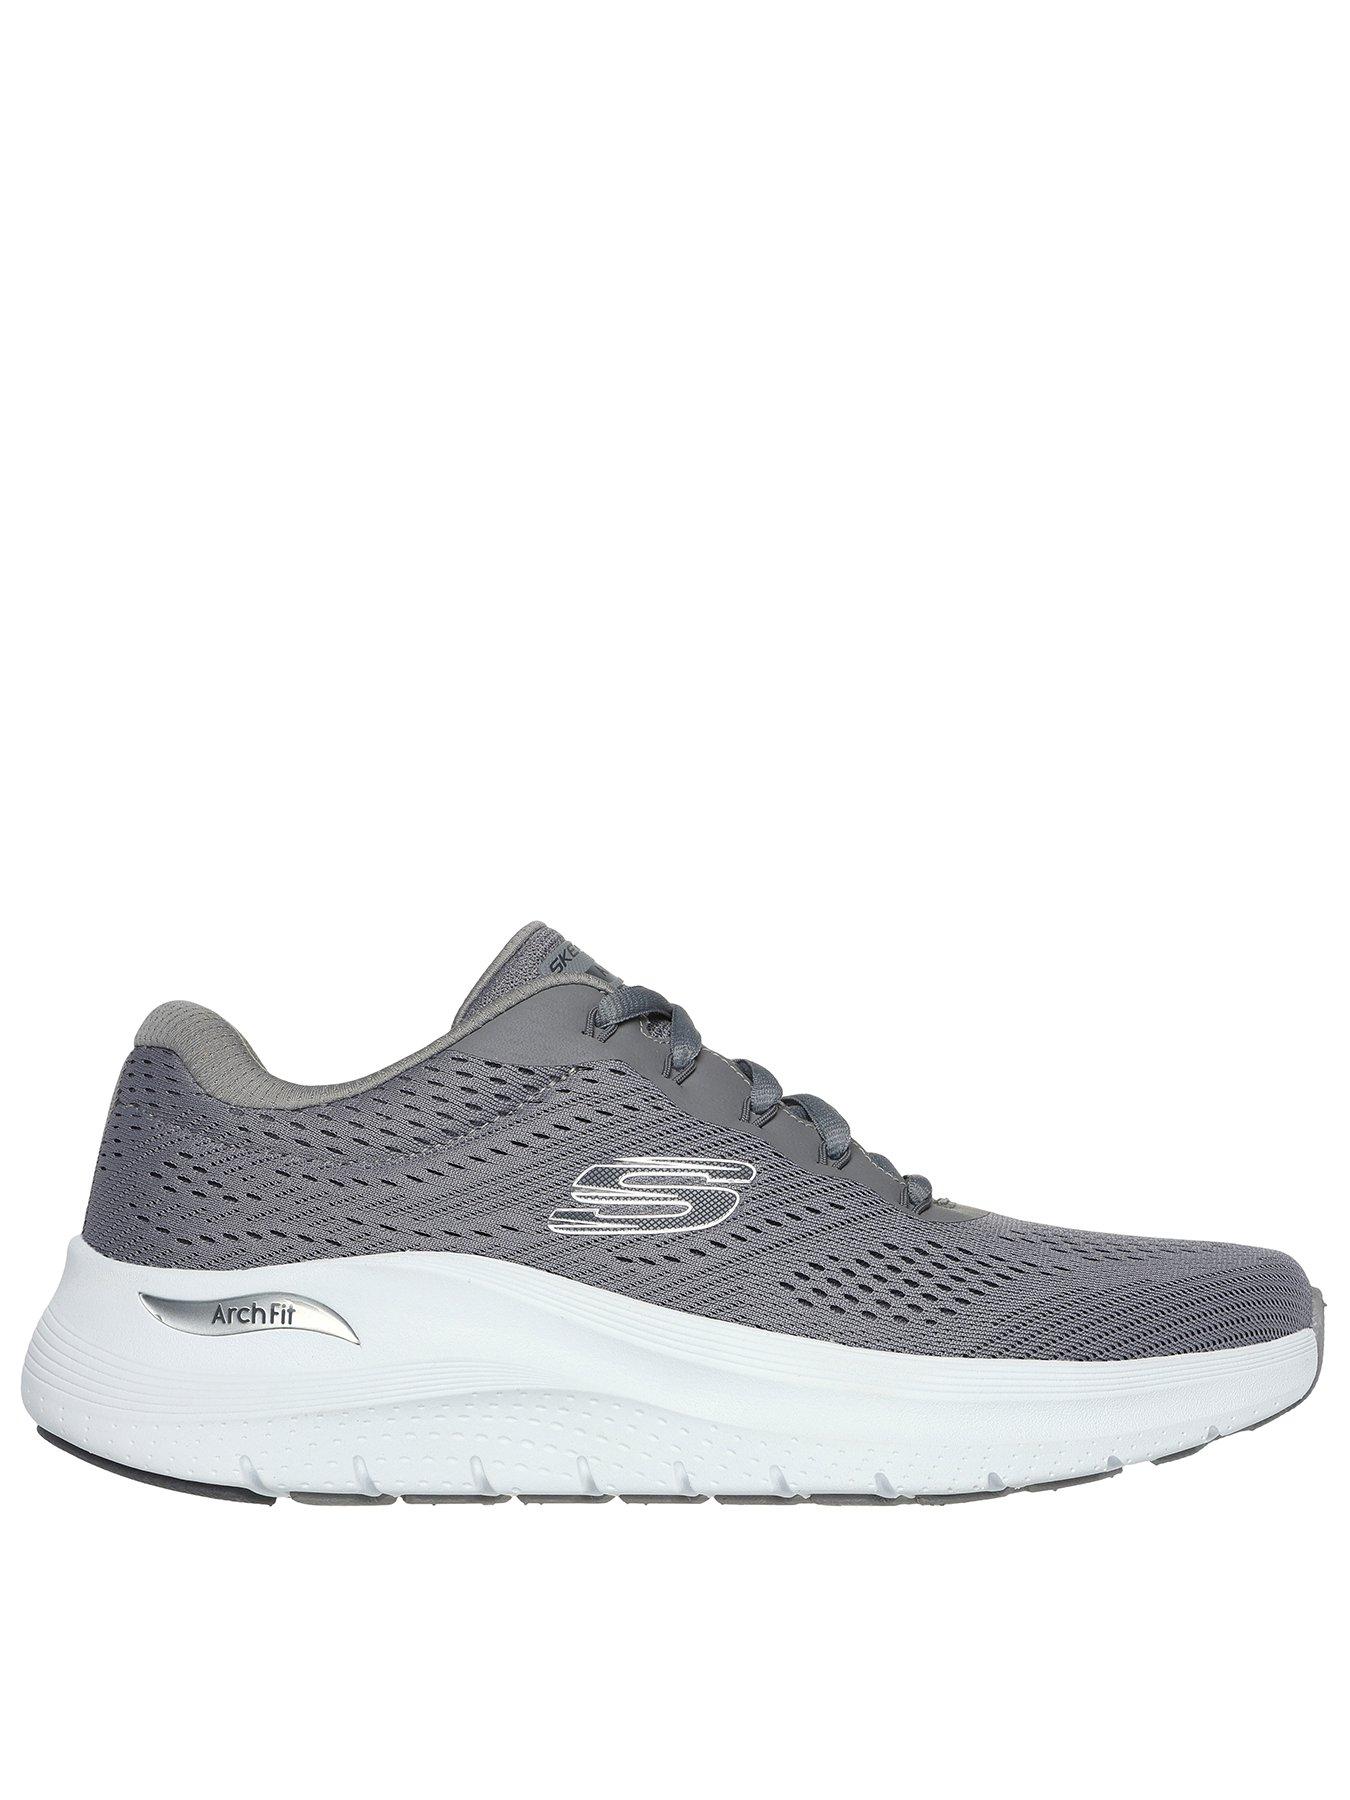 Skechers Arch Fit Engineered Mesh Lace-up Trainers | very.co.uk